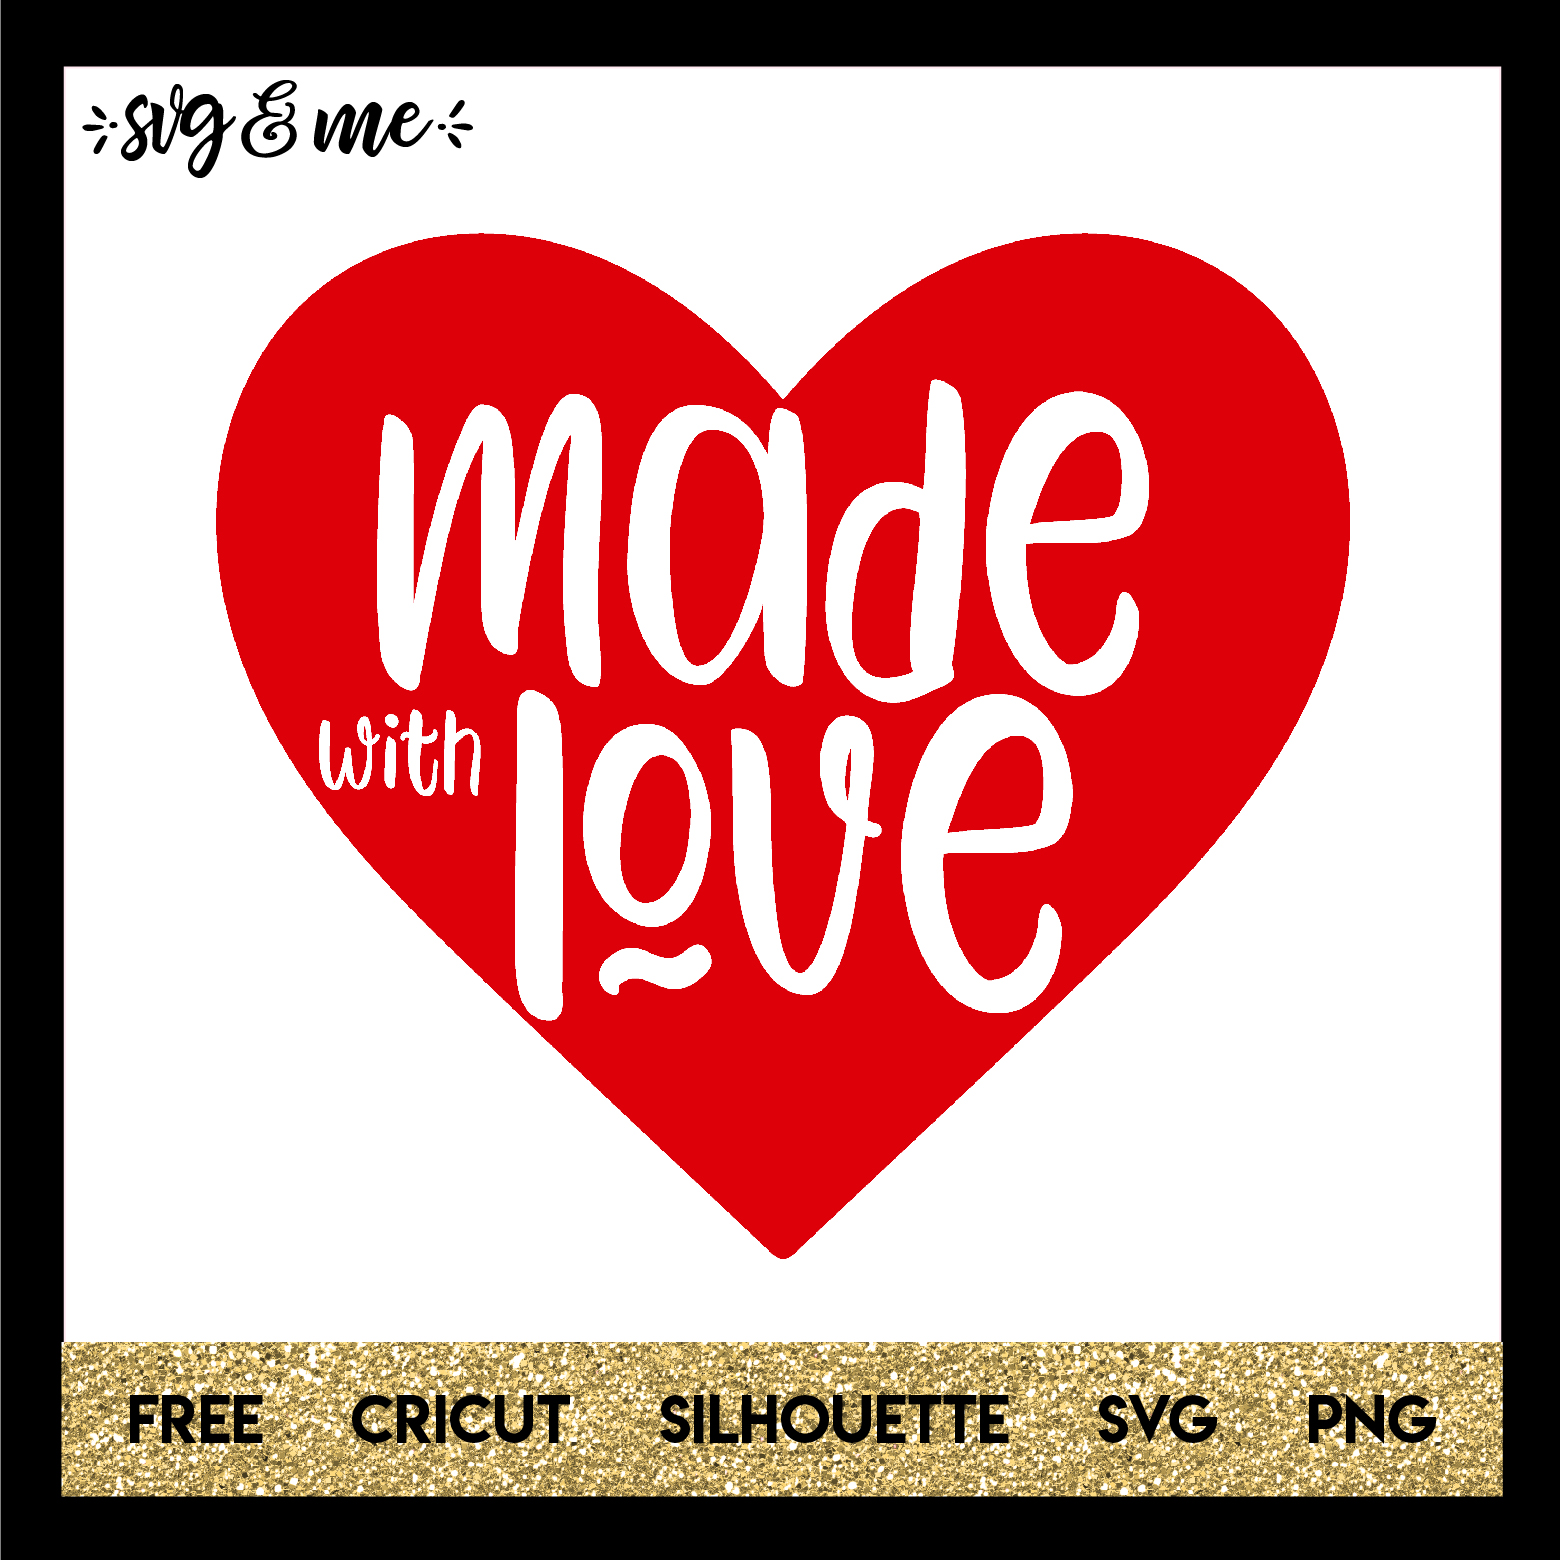 FREE SVG CUT FILE for Cricut and Silhouette DIY Projects - Made with Love SVG